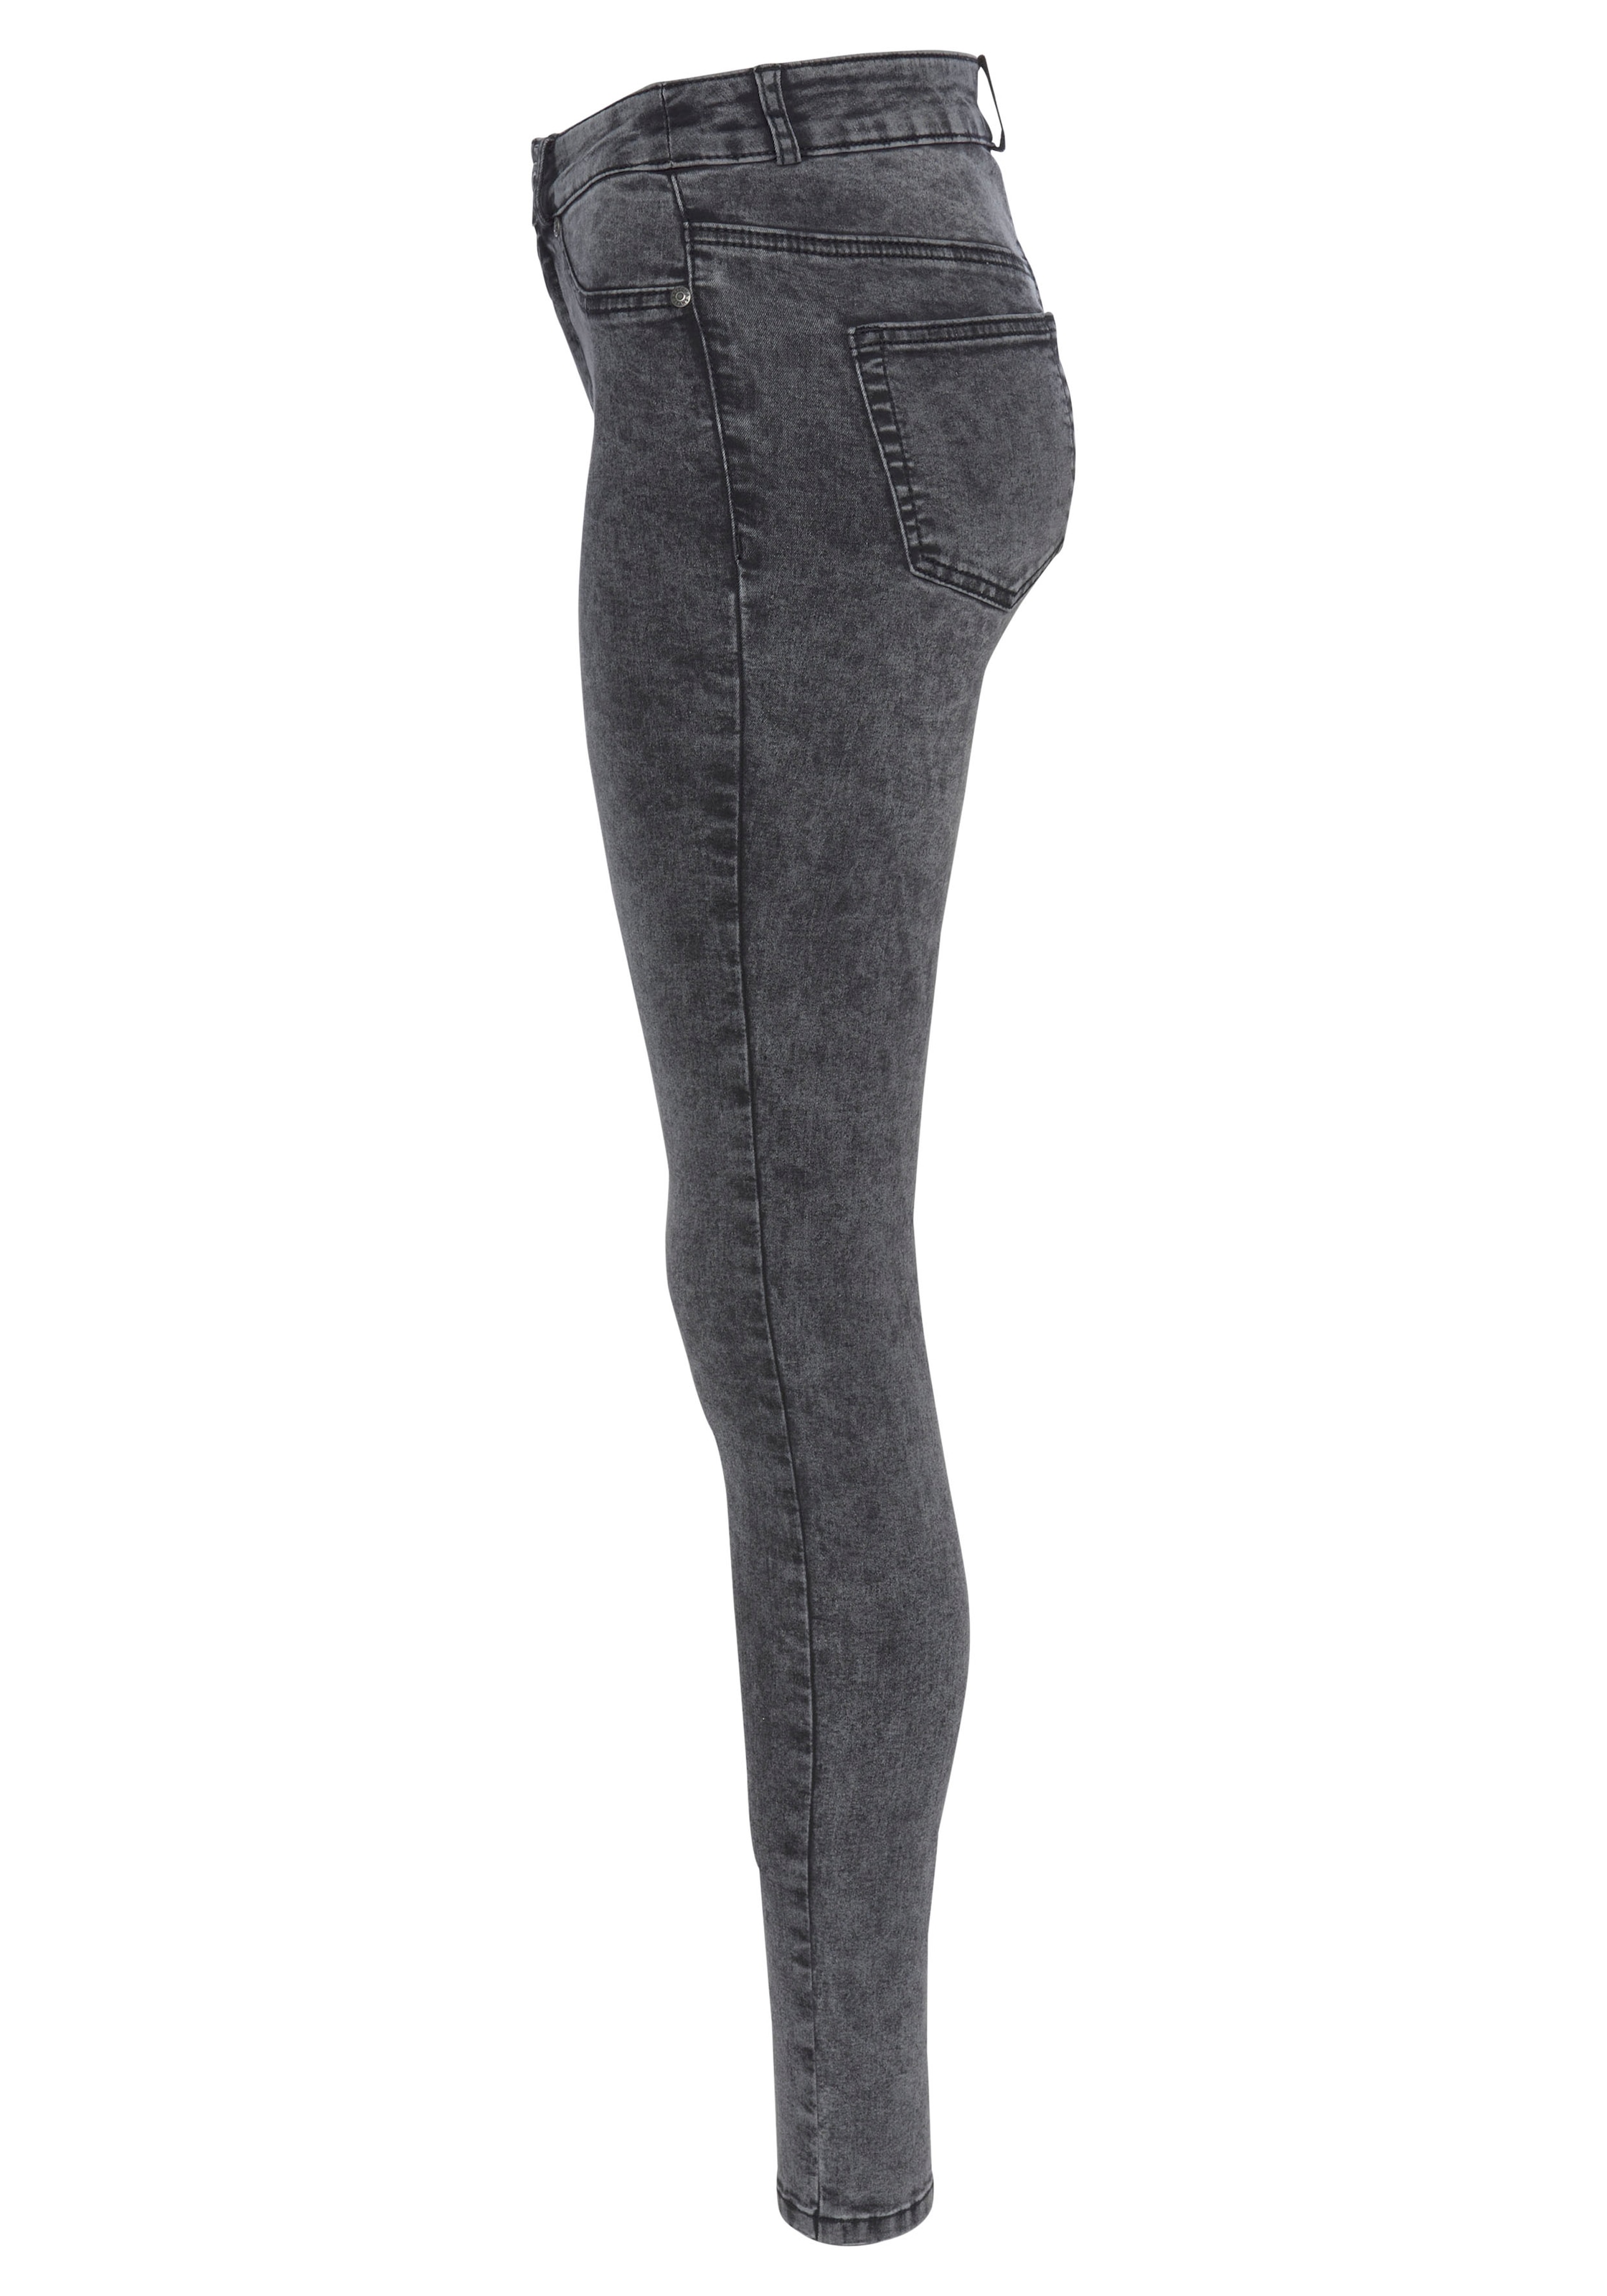 Arizona Skinny-fit-Jeans »Ultra Stretch moon Jeans Online Moonwashed washed«, Shop im OTTO